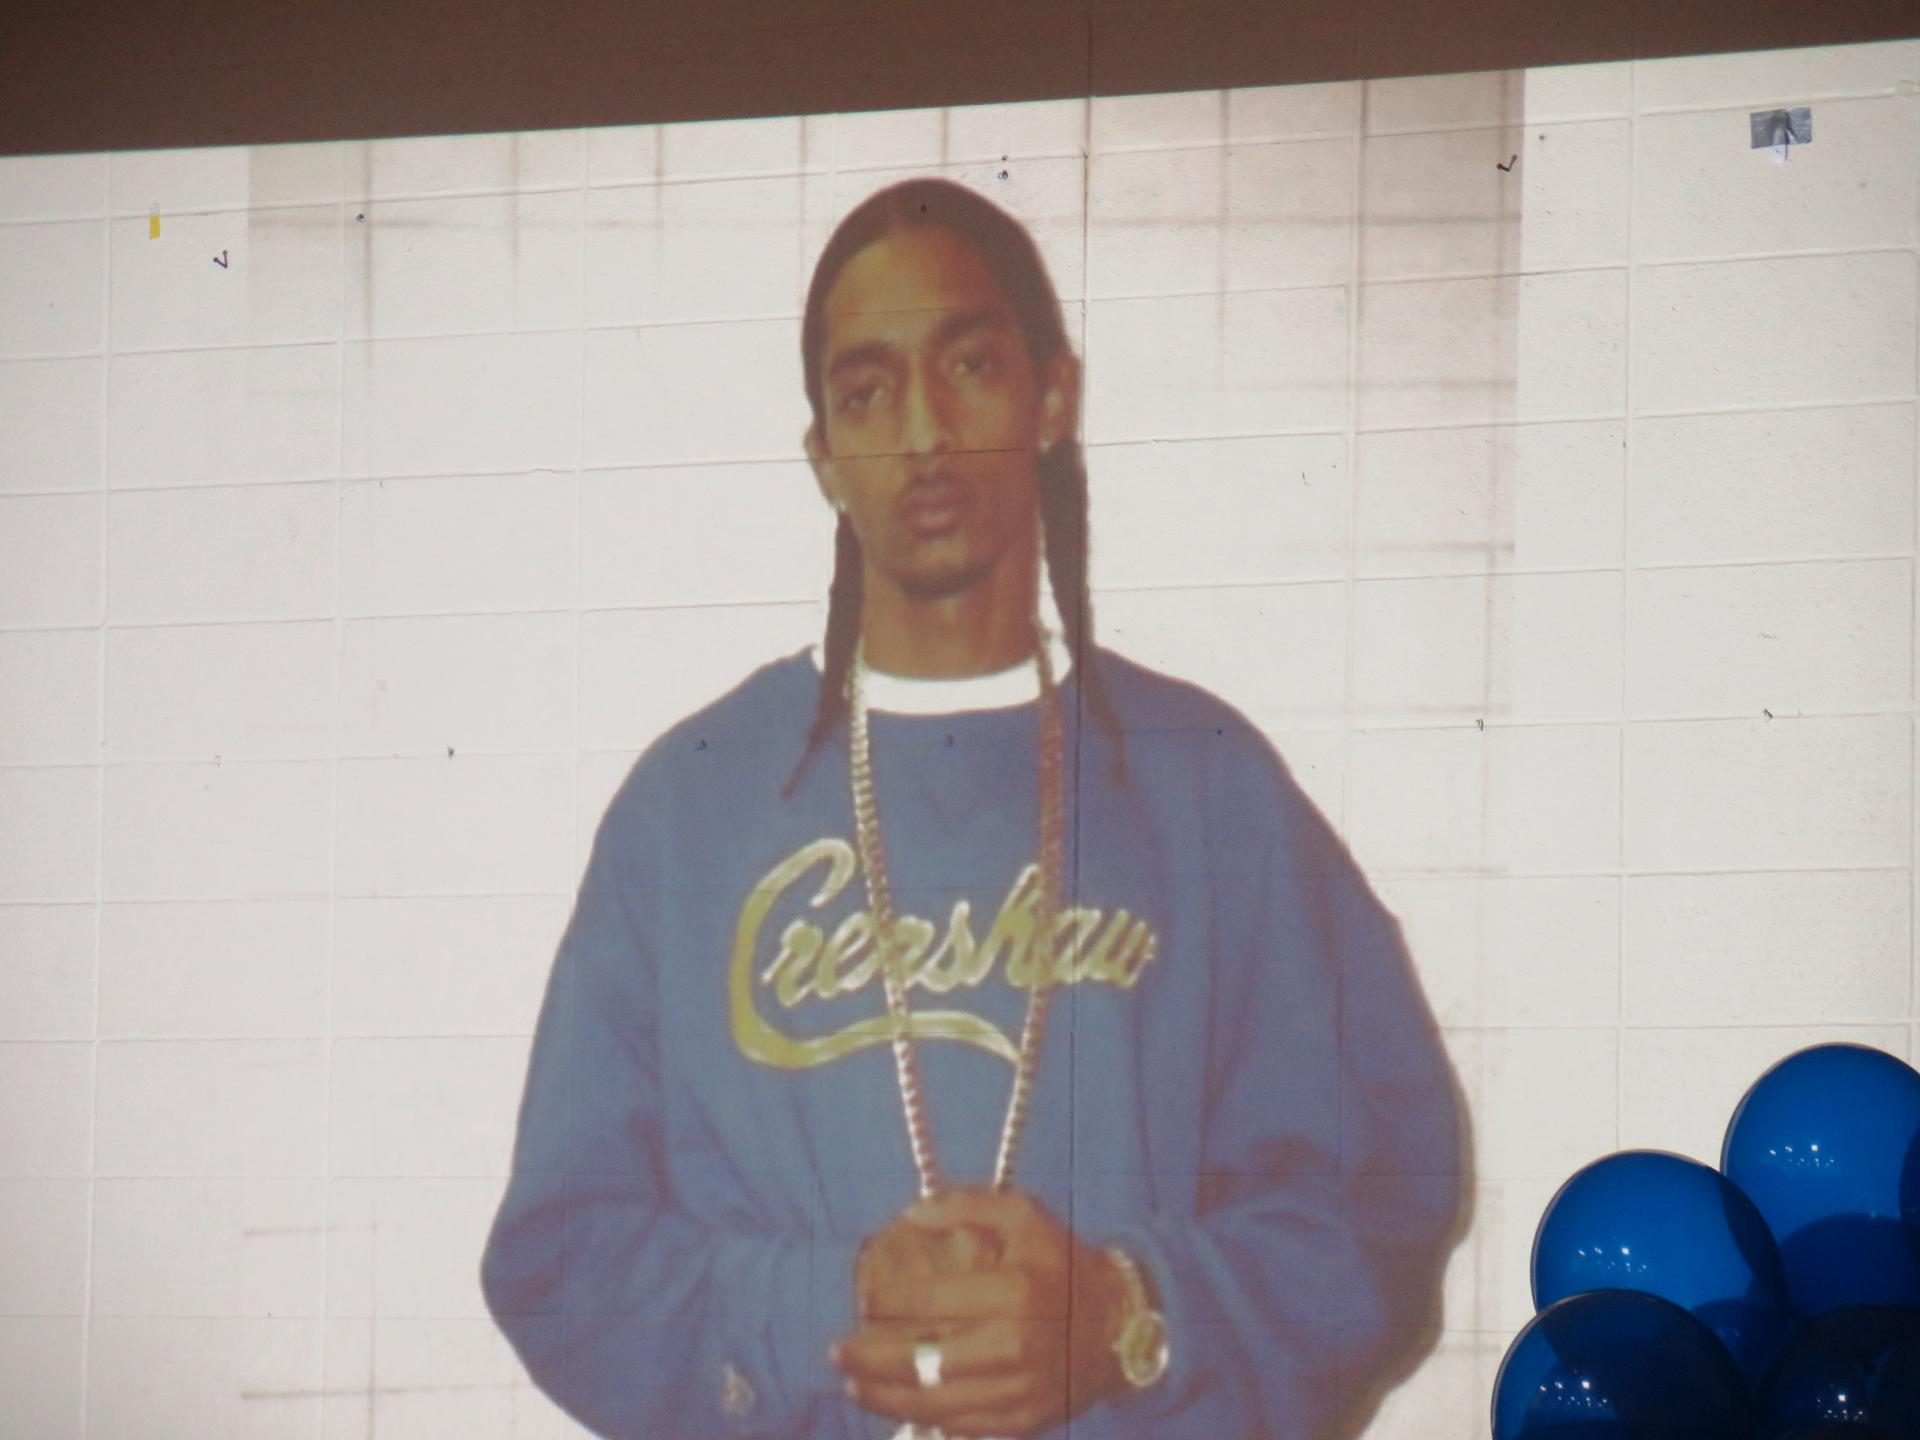 A photo of a black man with a shirt that says Crenshaw is projected on a wall